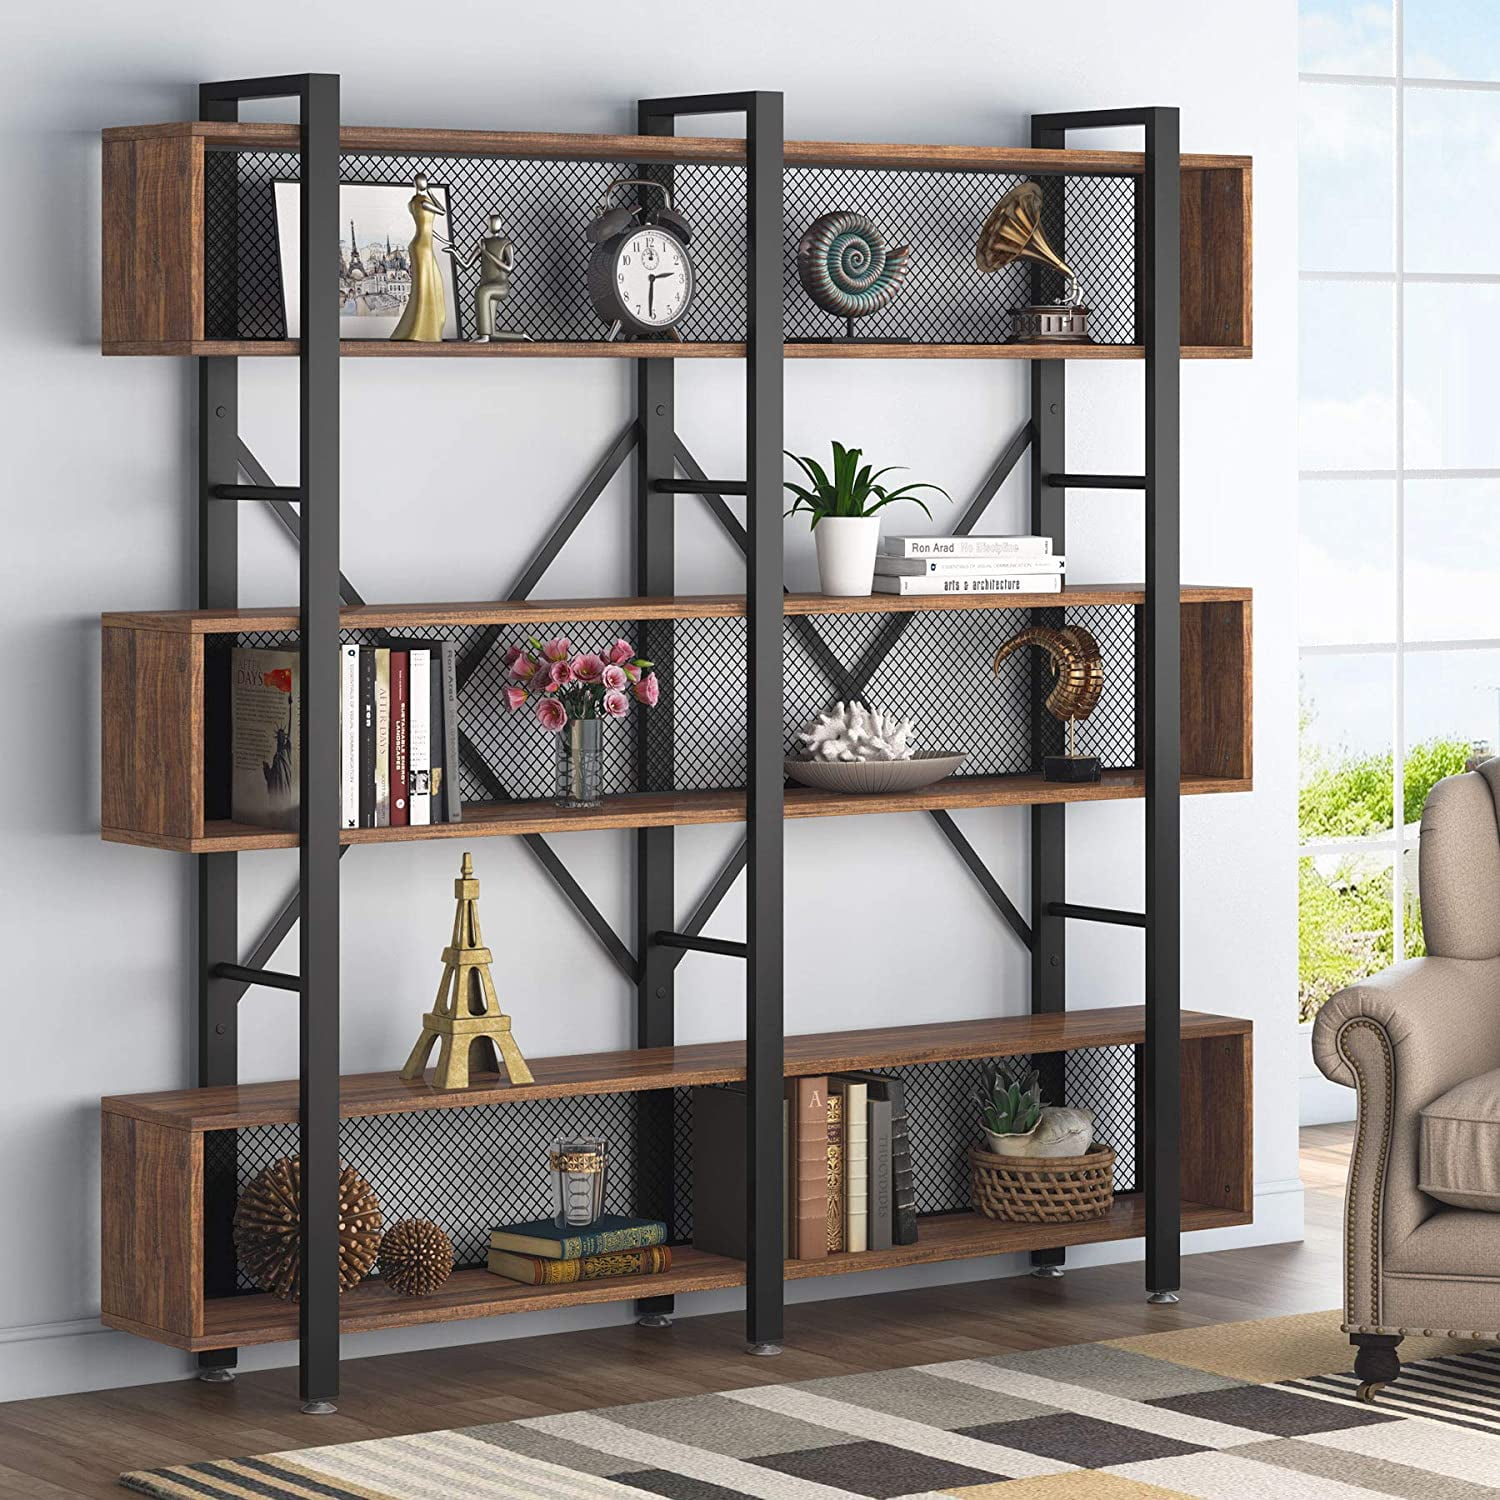 Best Display Bookcase Ideas in 2022